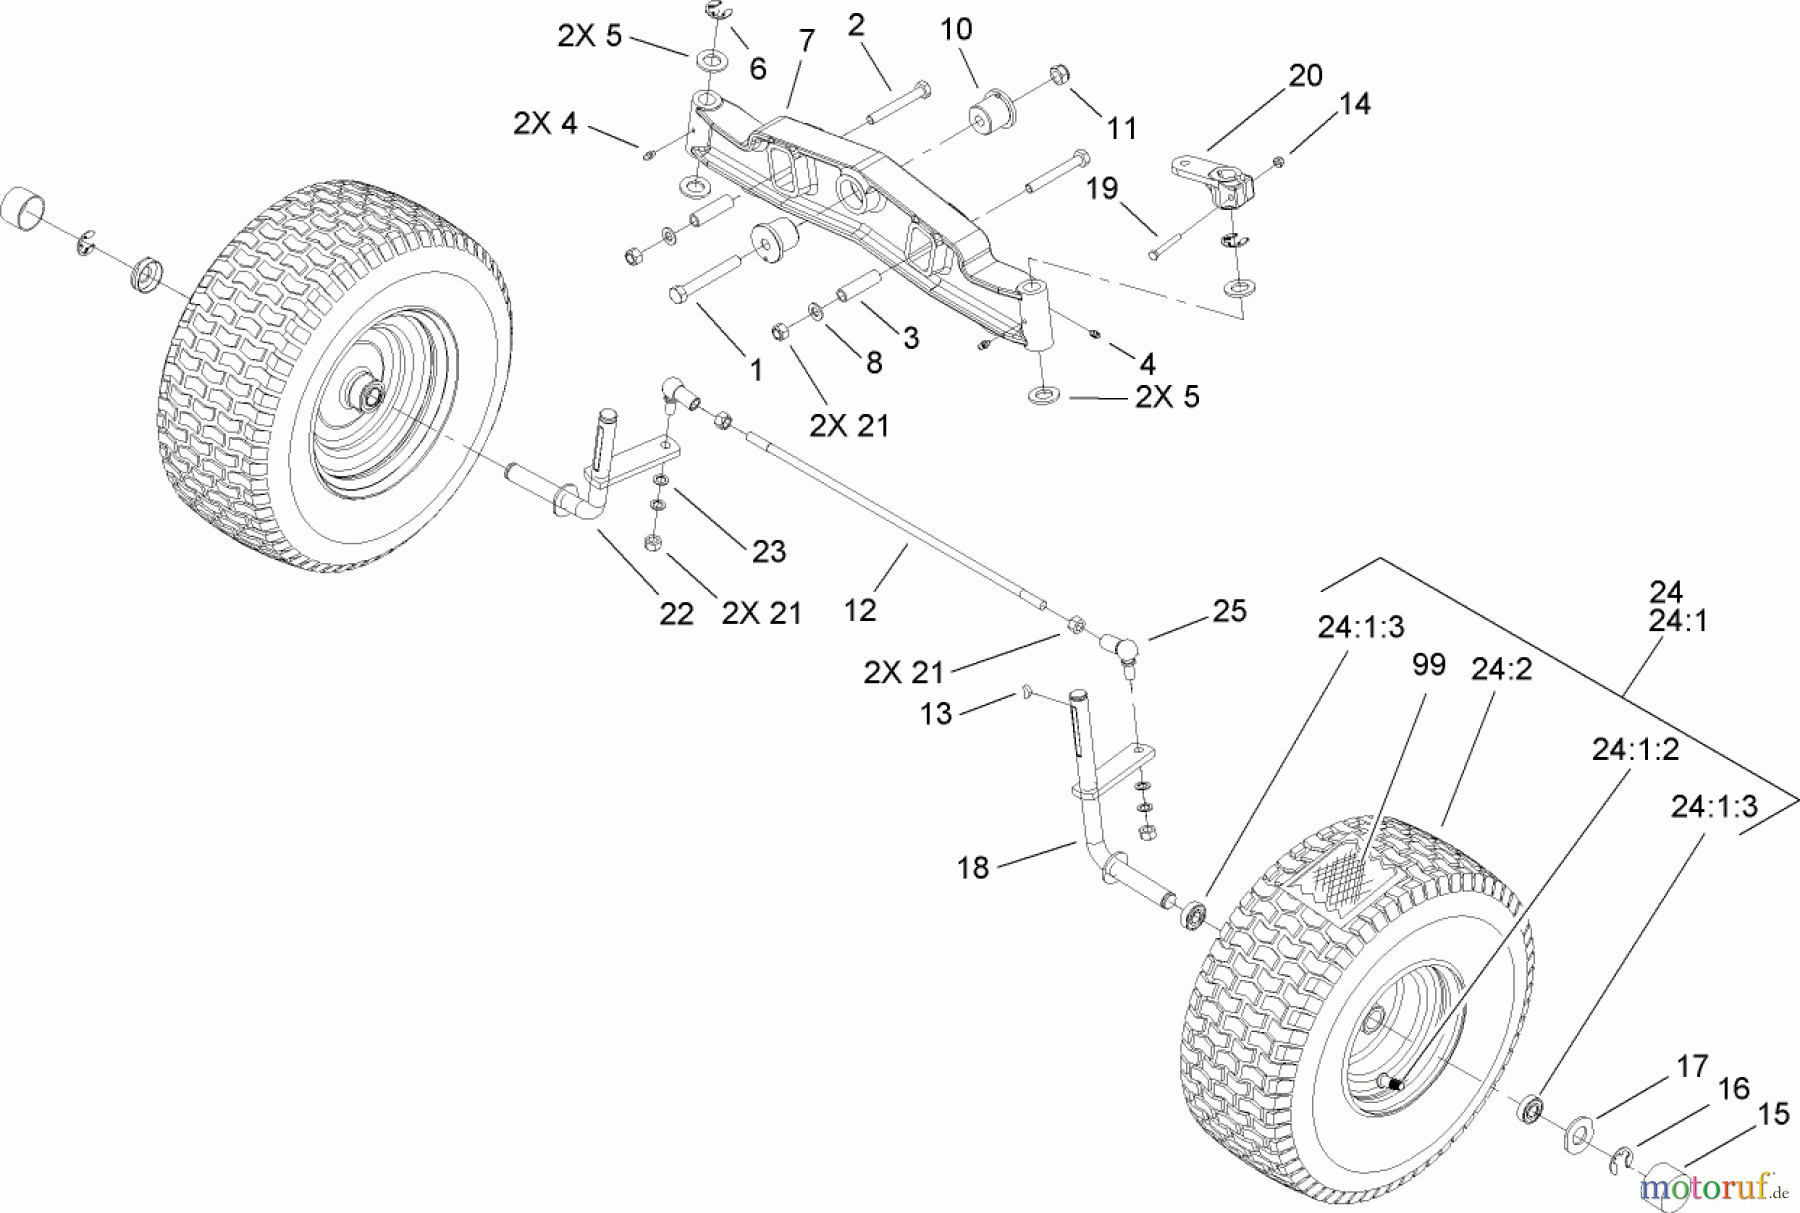  Toro Neu Mowers, Lawn & Garden Tractor Seite 1 74573 (DH 200) - Toro DH 200 Lawn Tractor, 2008 (280000001-280999999) FRONT AXLE ASSEMBLY